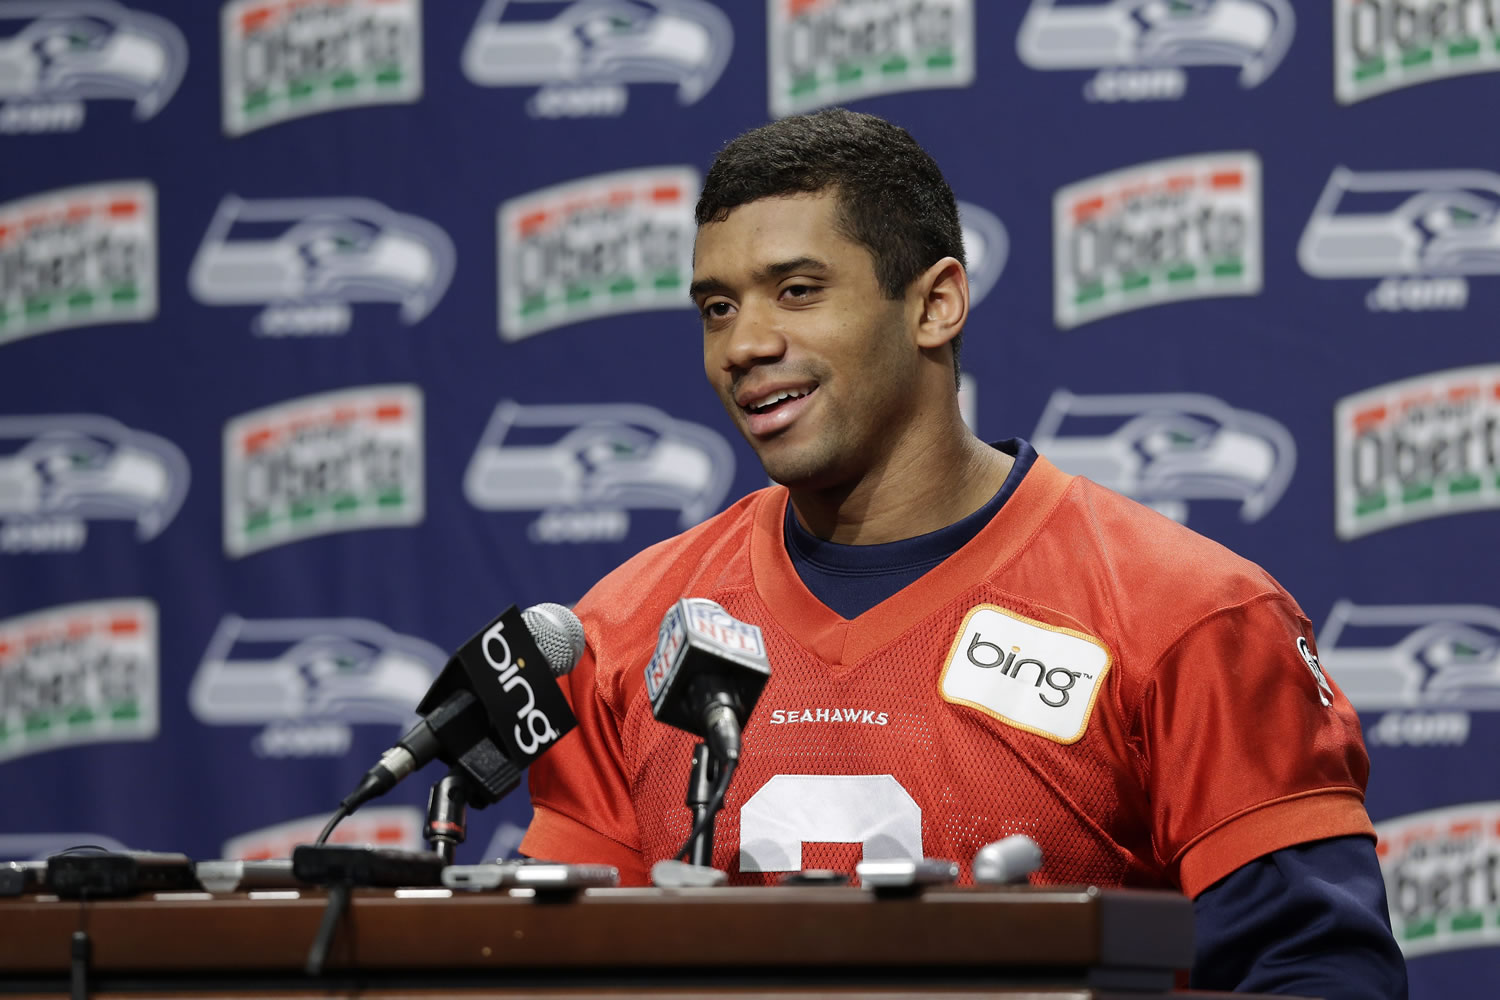 Seattle Seahawks quarterback Russell Wilson takes command of the press conference on Thursday in Renton.